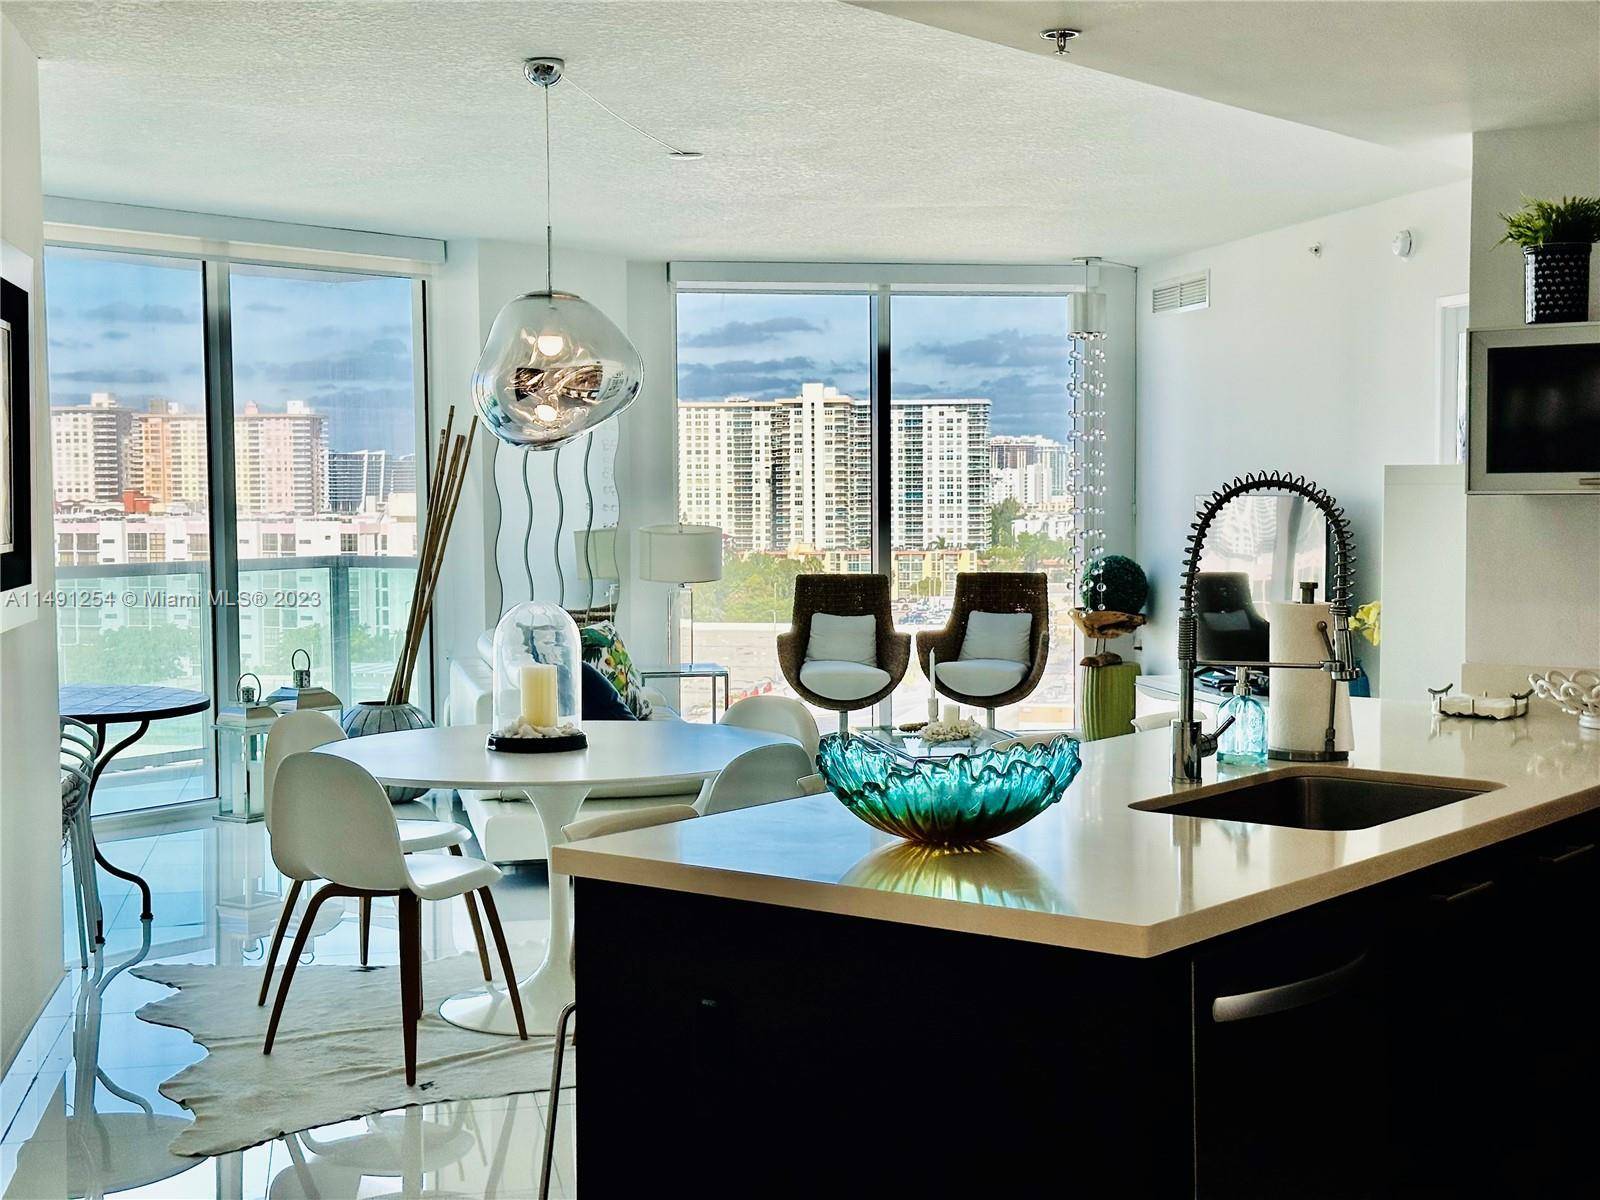 SUNNY ISLES BEACH SHORT TERM RENTAL FULLY FURNISHED 3 MONTH MINIMUM GREAT VIEWS, NEW BEDS, 1 KING IN MASTER, 3 QUEEN BEDS IN 2ND 3RD BEDROOMS, BRIGHT BEAUTIFULLY DESIGNED UNIT ...